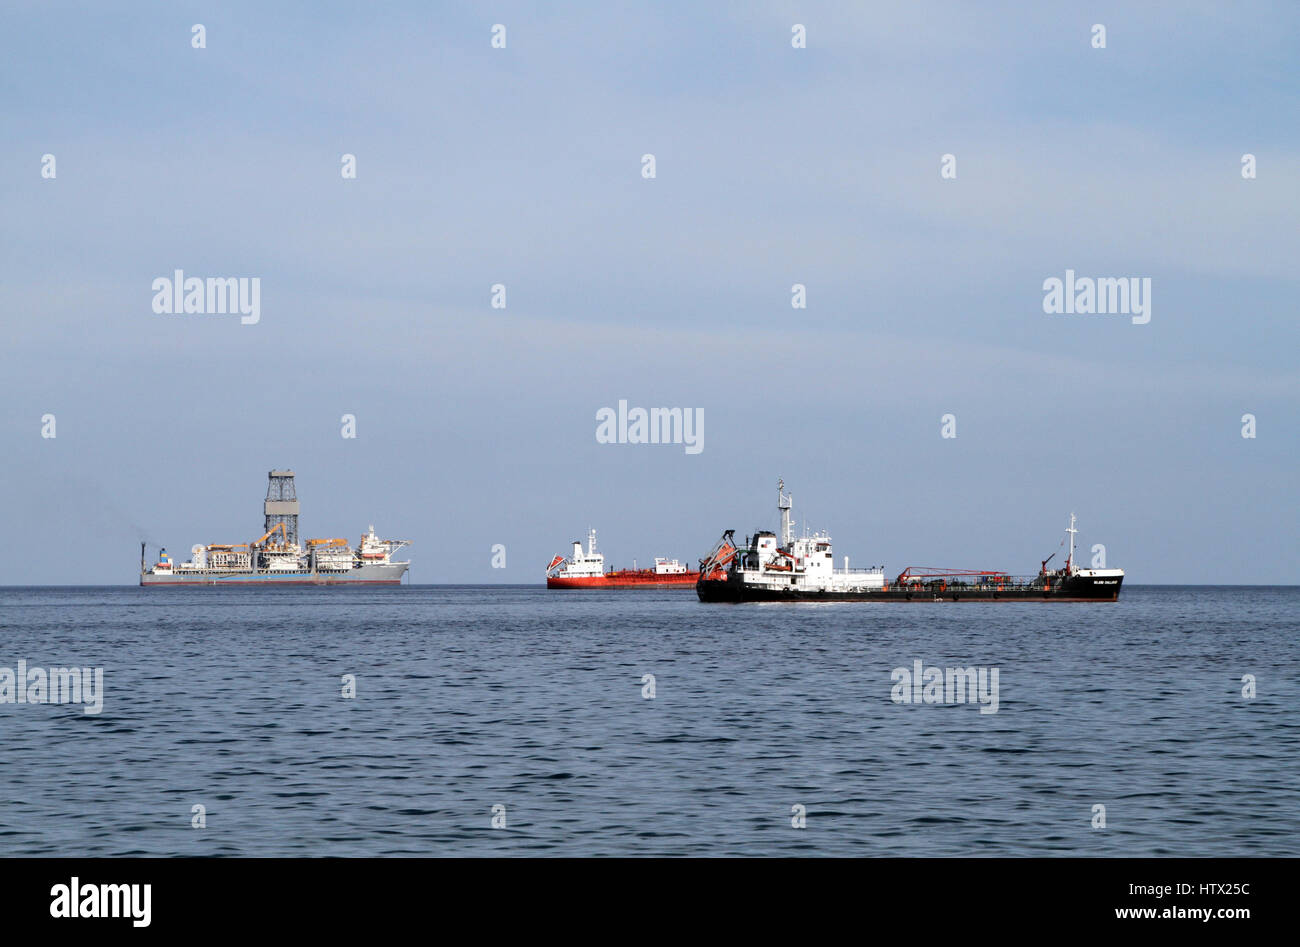 The Island Challenger (right), an oil products tanker, lying off the coast from Limassol, Cyprus, with other vessels. Stock Photo